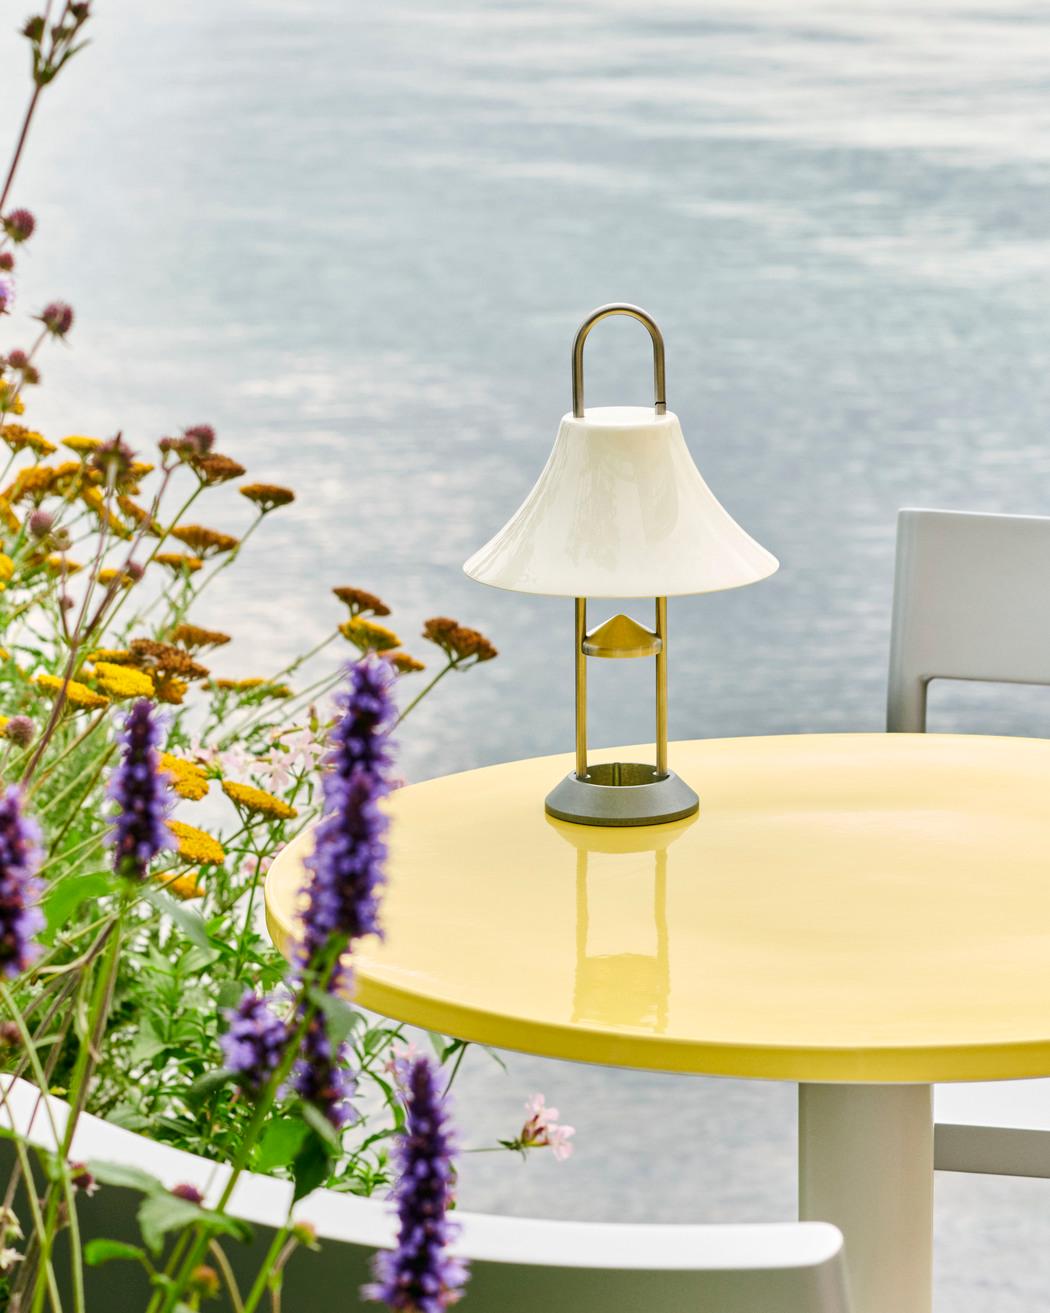 Steel Ceramic Table Ø70, Outdoor-Bright Yellow Porcelain-by Muller Van Severen for Hay For Sale